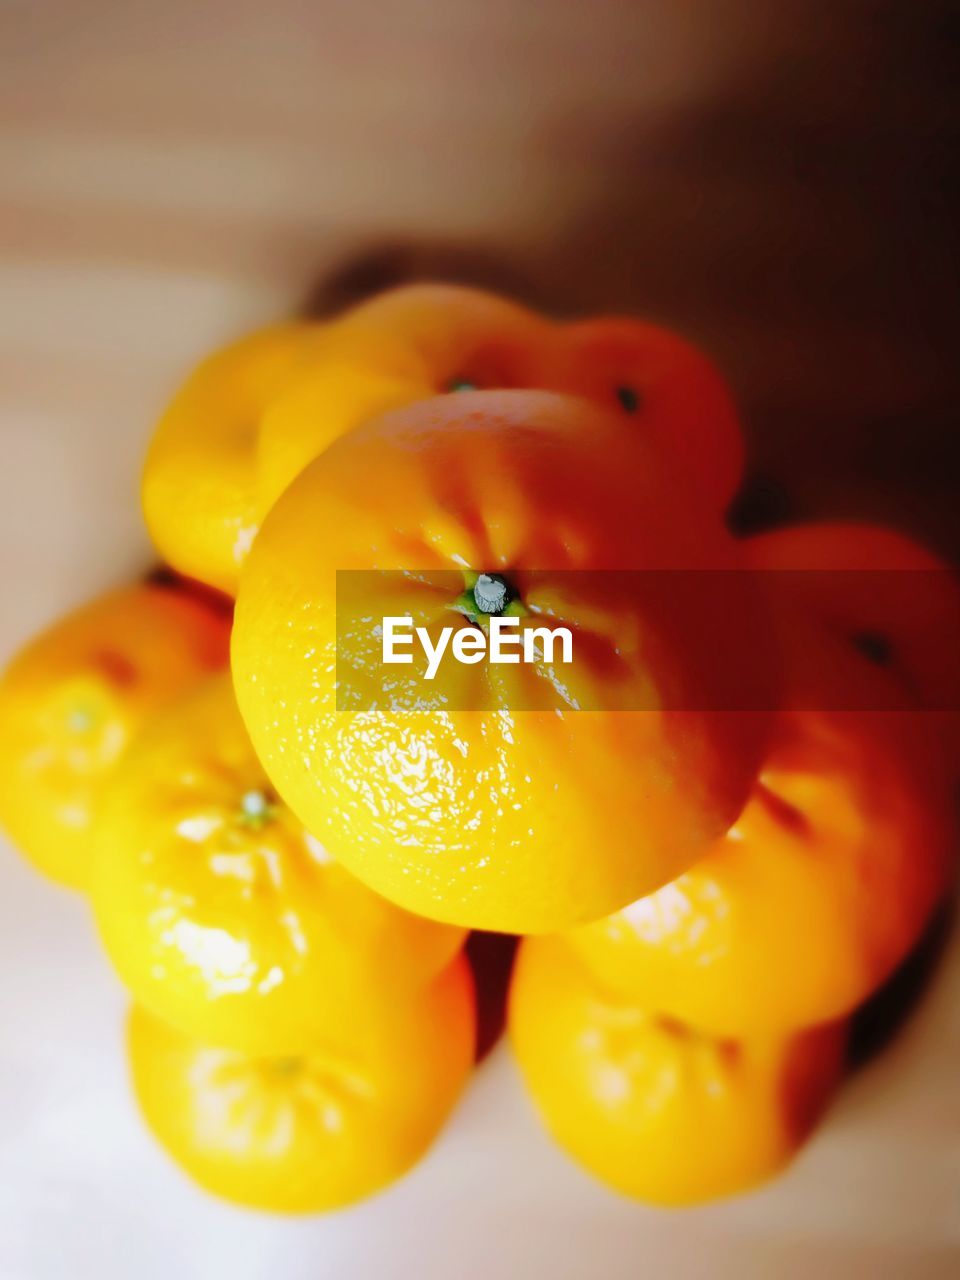 yellow, food and drink, food, healthy eating, wellbeing, plant, fruit, freshness, produce, flower, macro photography, orange, indoors, clementine, close-up, citrus, no people, studio shot, orange color, group of objects, citrus fruit, vegetable, still life, ripe, tangerine, organic, juicy